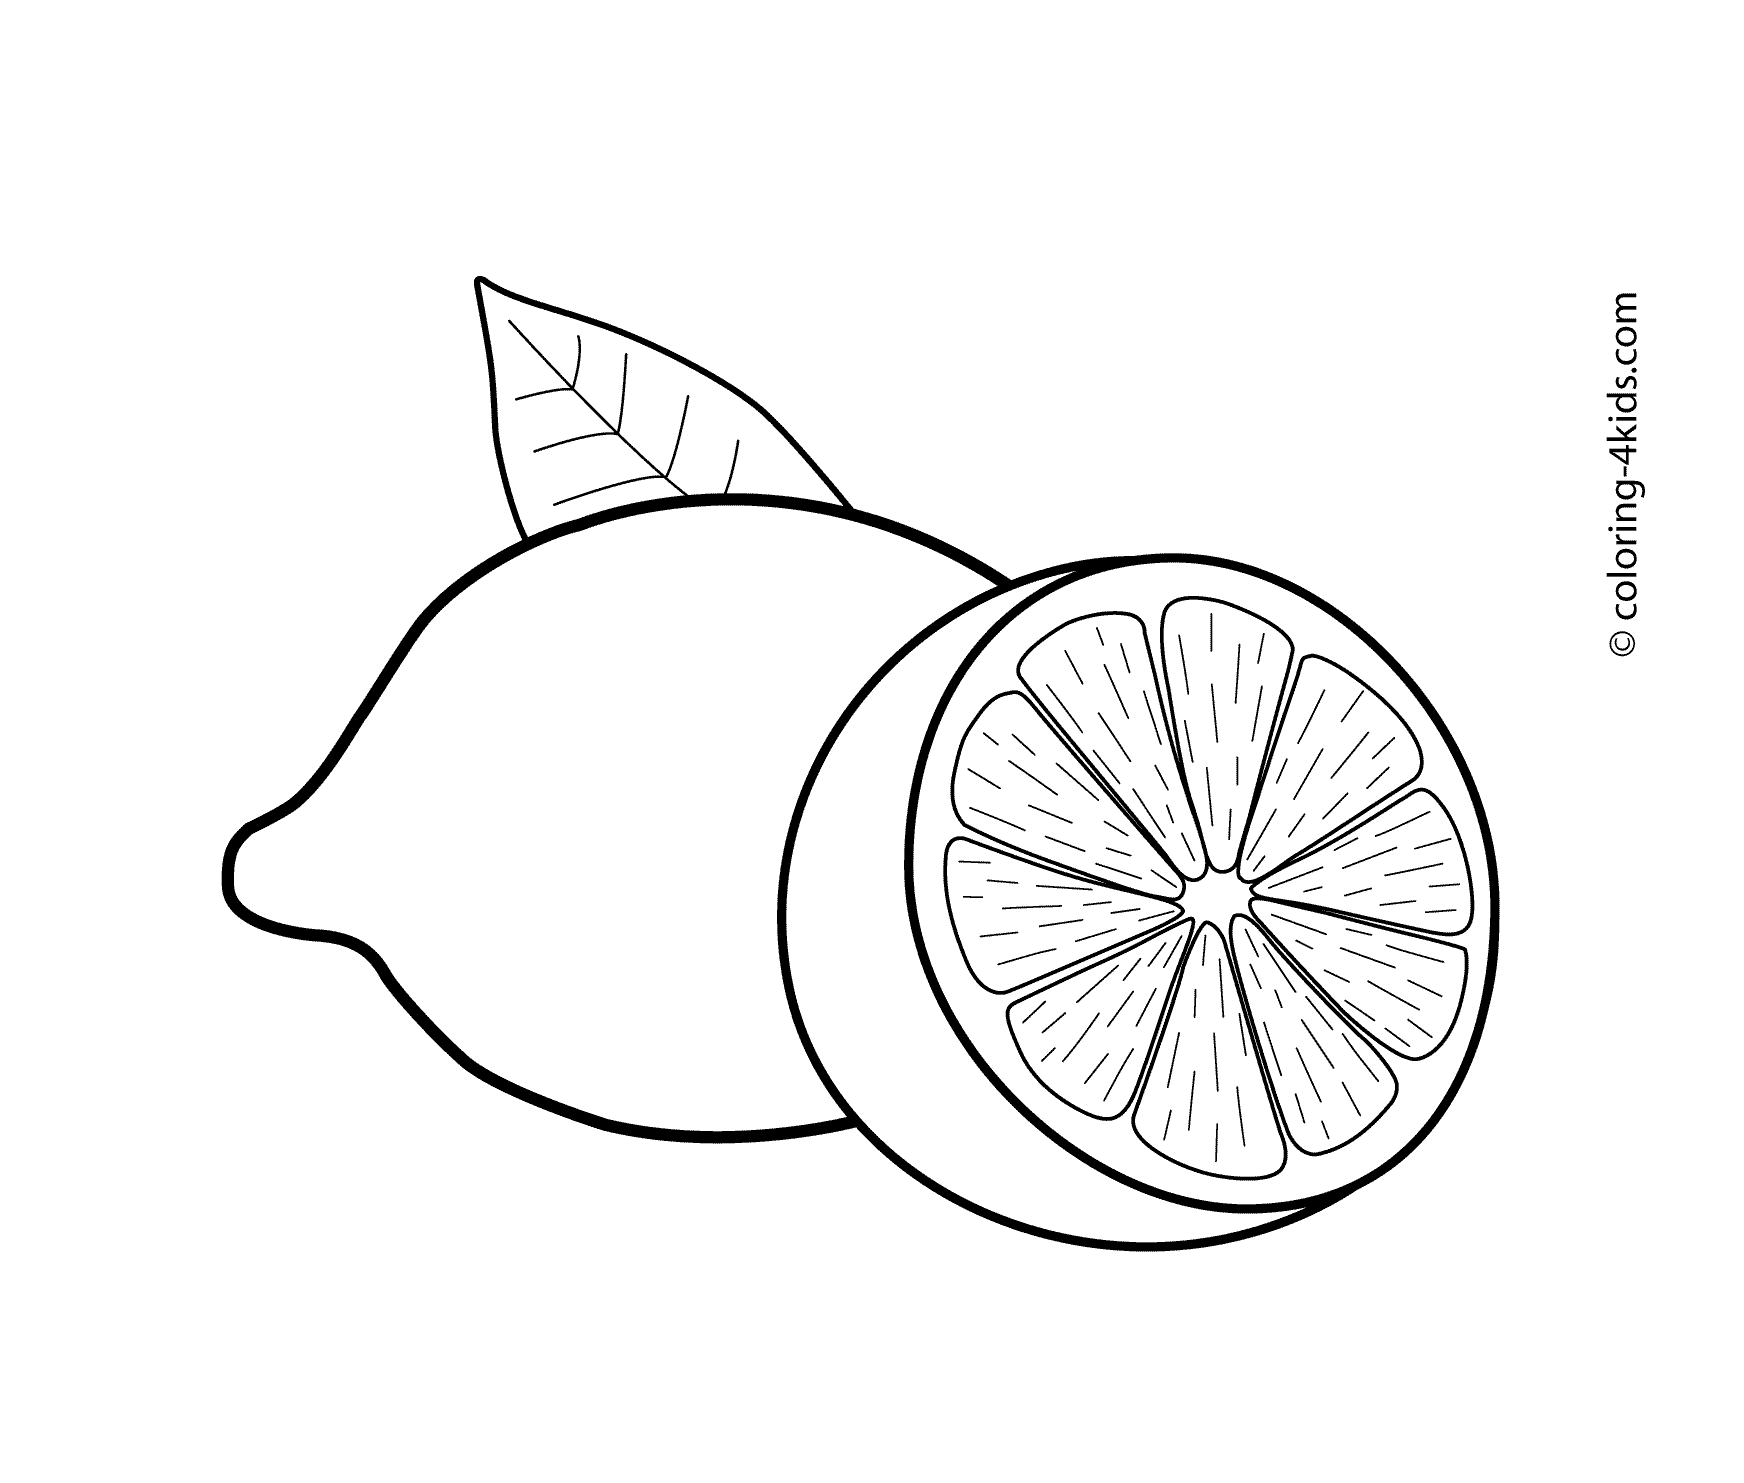 Lemon Coloring Pages For Kids